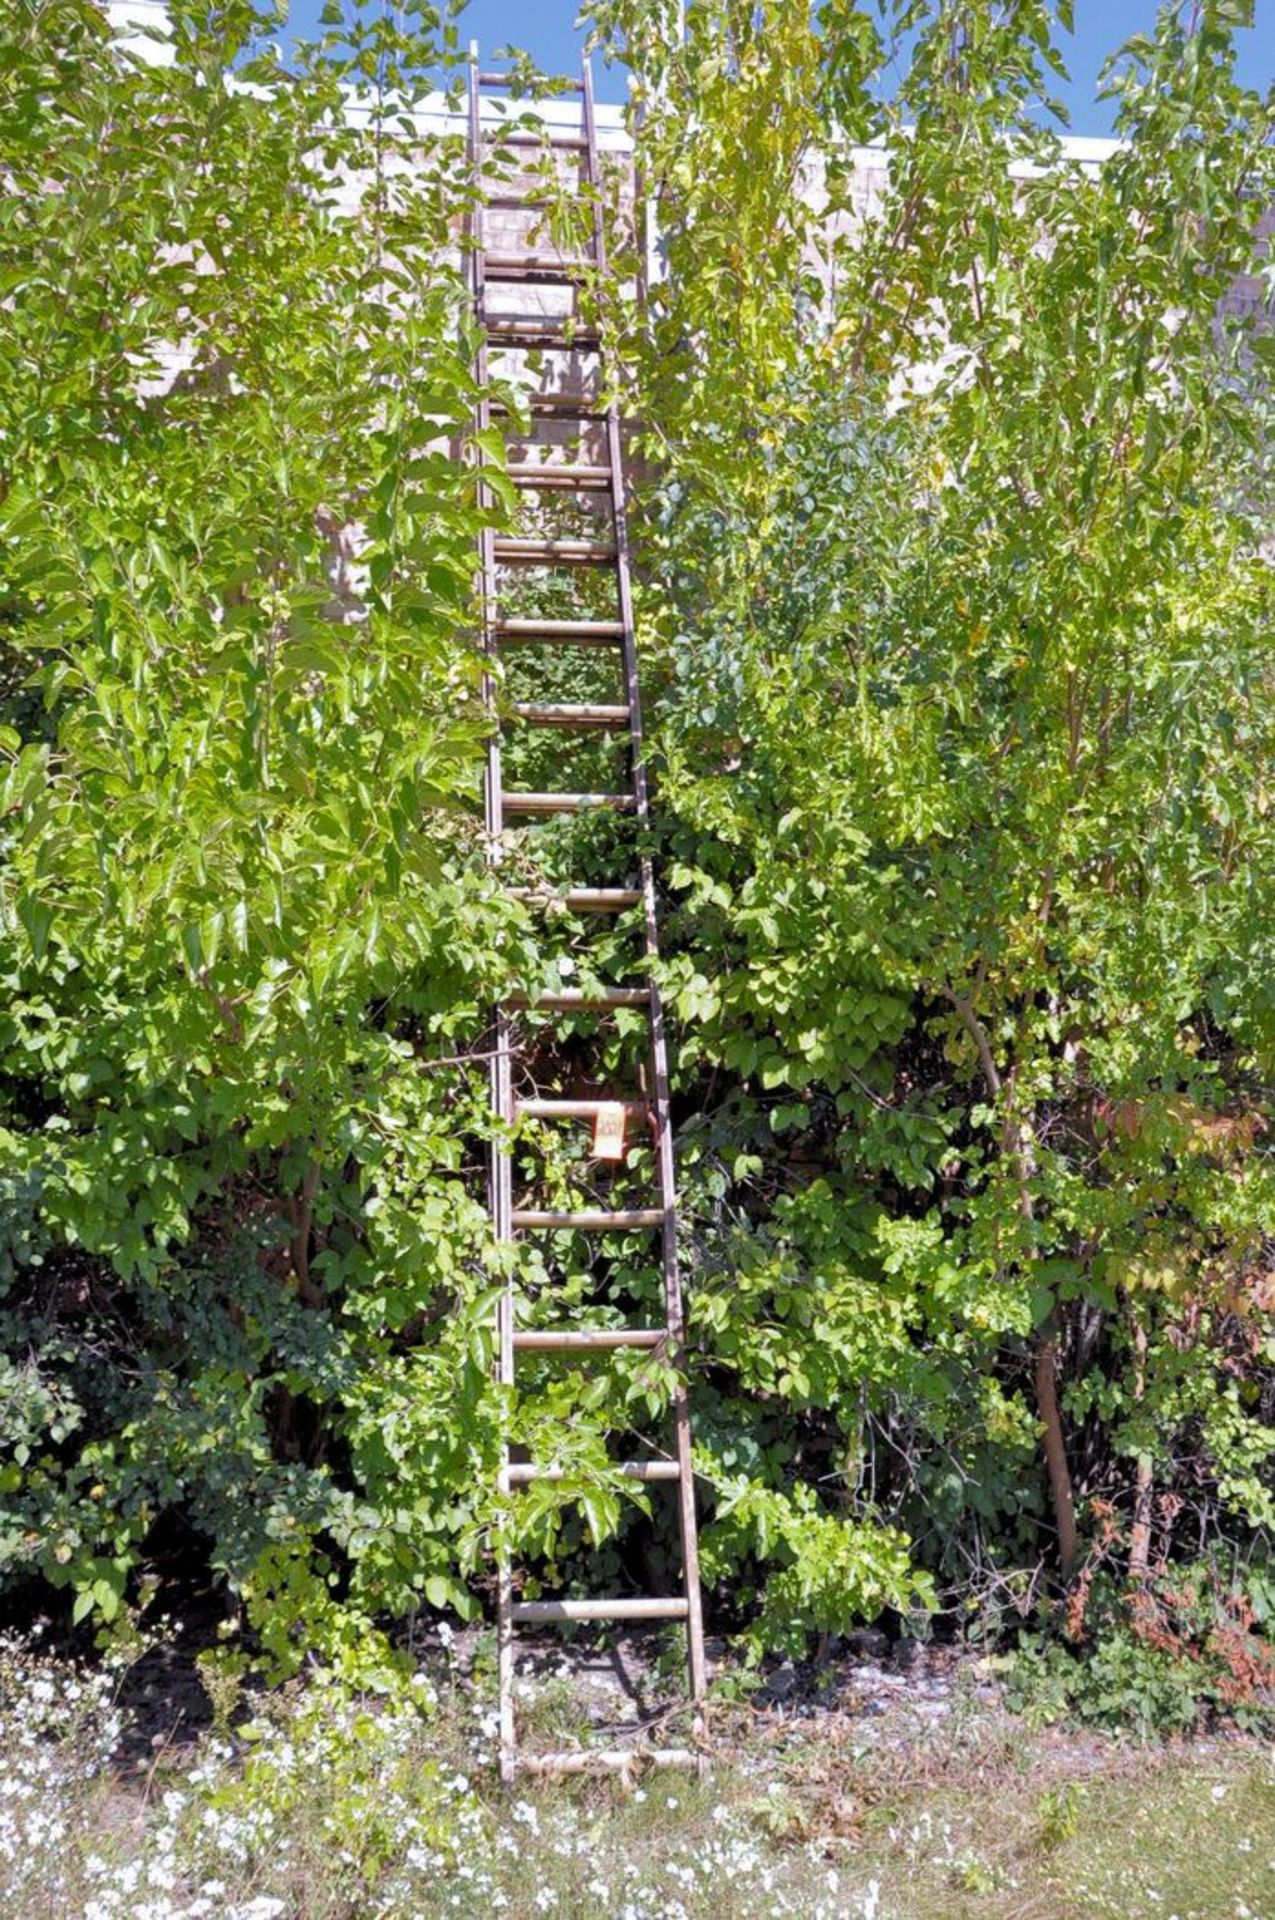 32 ft. Aluminum Extension Ladder (Removal Cost : N/C)